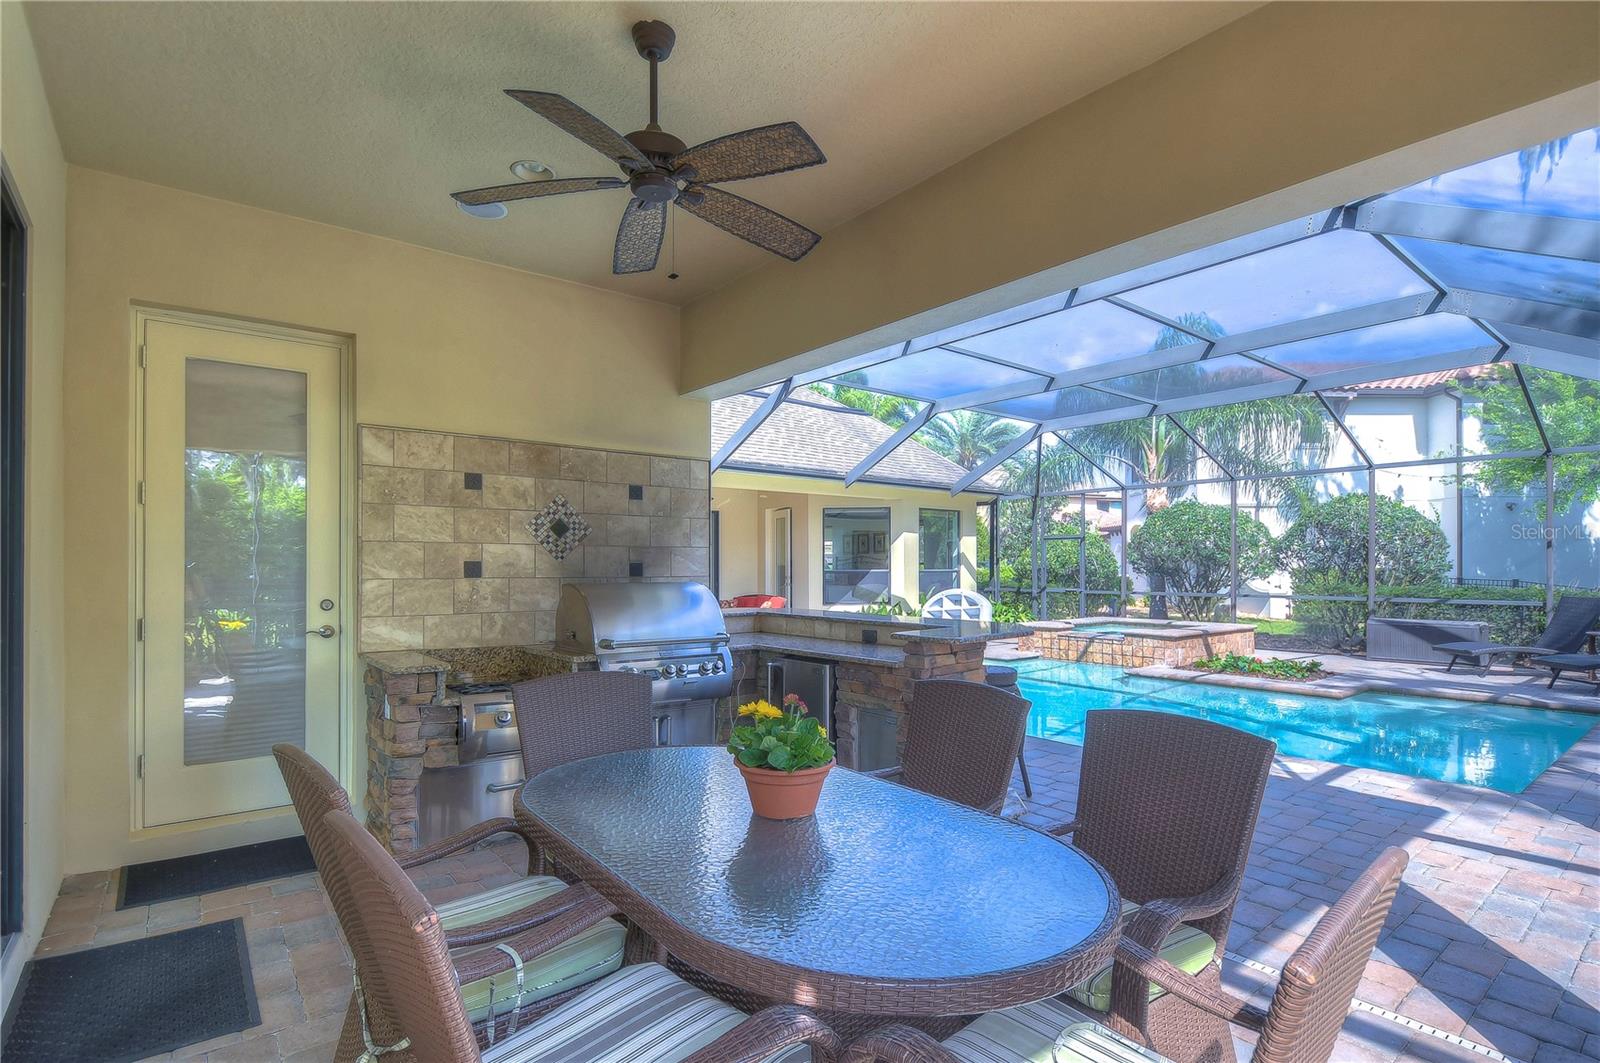 Enjoy the Florida weather in the shade on your covered lanai!